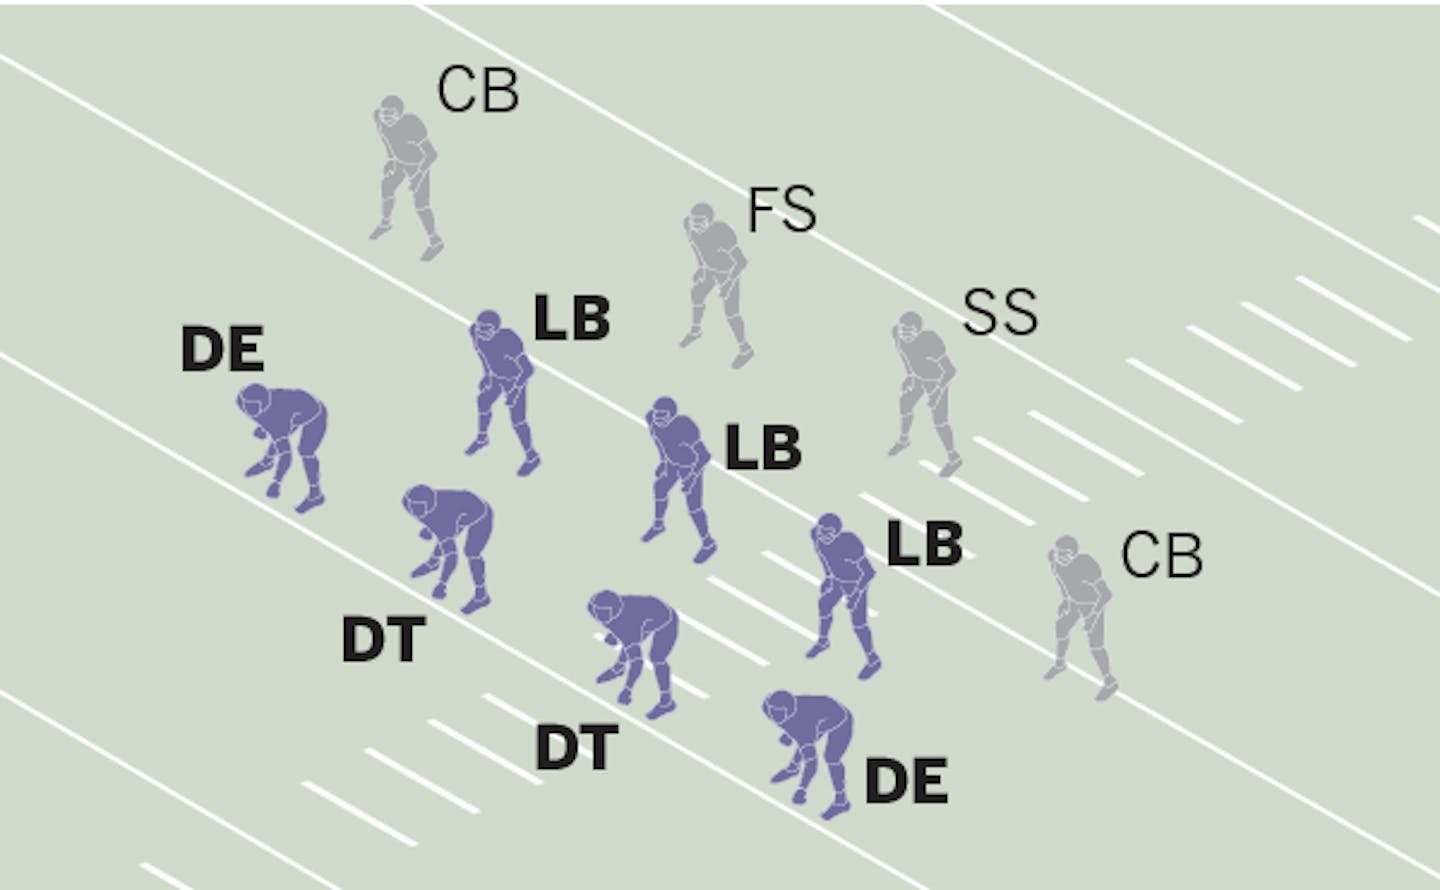 A diagram of a football field with defensive players highlighted showing how players were positioned in Zimmer's configuration.